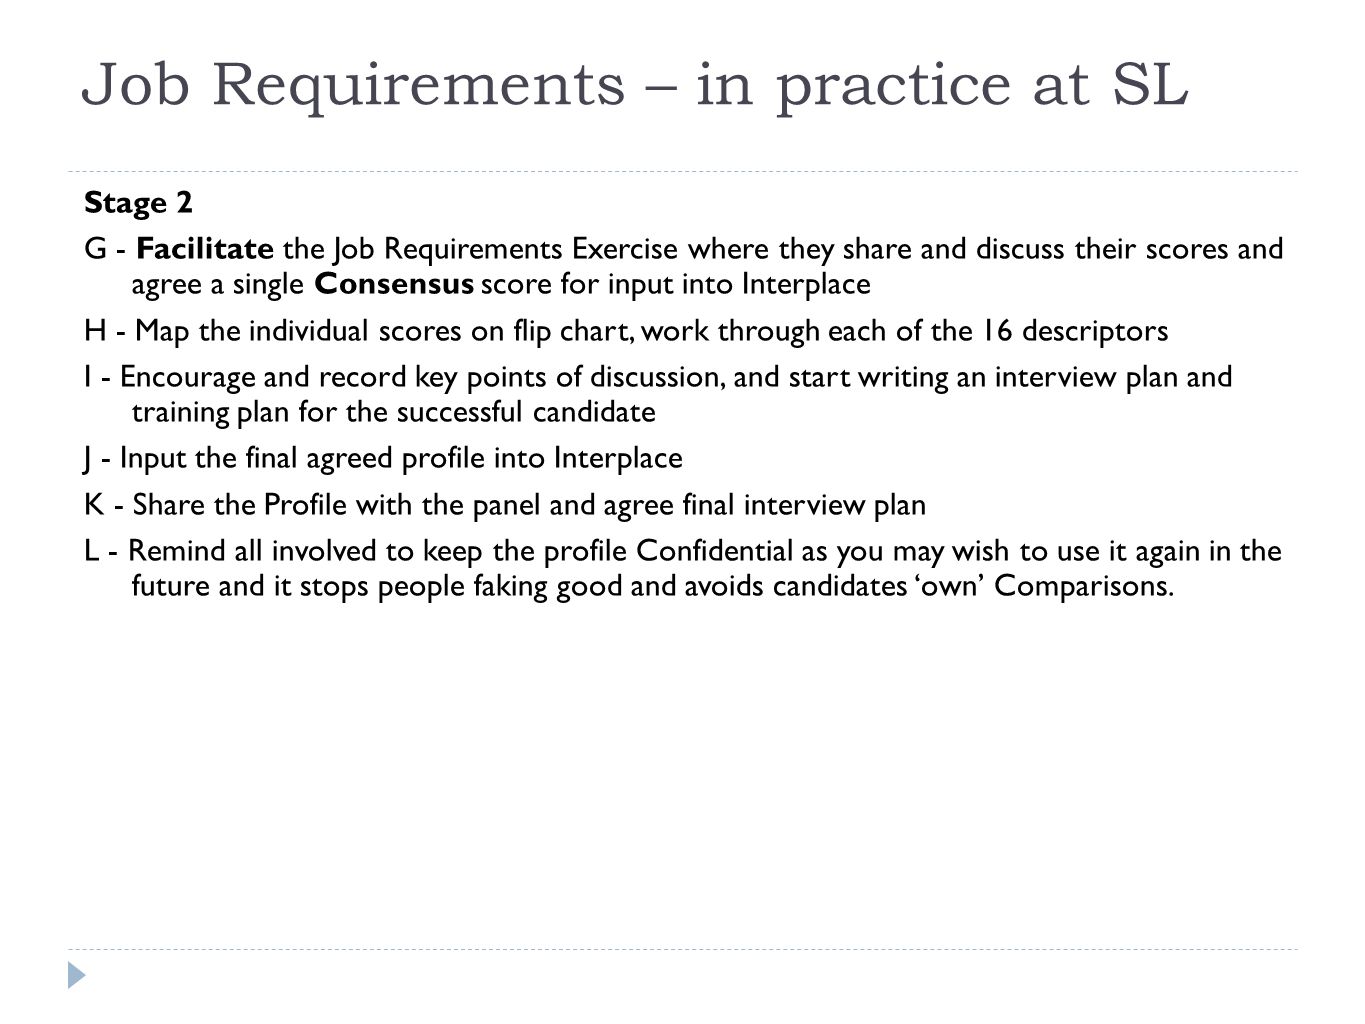 Job Requirements – in practice at SL Stage 2 G - Facilitate the Job Requirements Exercise where they share and discuss their scores and agree a single Consensus score for input into Interplace H - Map the individual scores on flip chart, work through each of the 16 descriptors I - Encourage and record key points of discussion, and start writing an interview plan and training plan for the successful candidate J - Input the final agreed profile into Interplace K - Share the Profile with the panel and agree final interview plan L - Remind all involved to keep the profile Confidential as you may wish to use it again in the future and it stops people faking good and avoids candidates ‘own’ Comparisons.